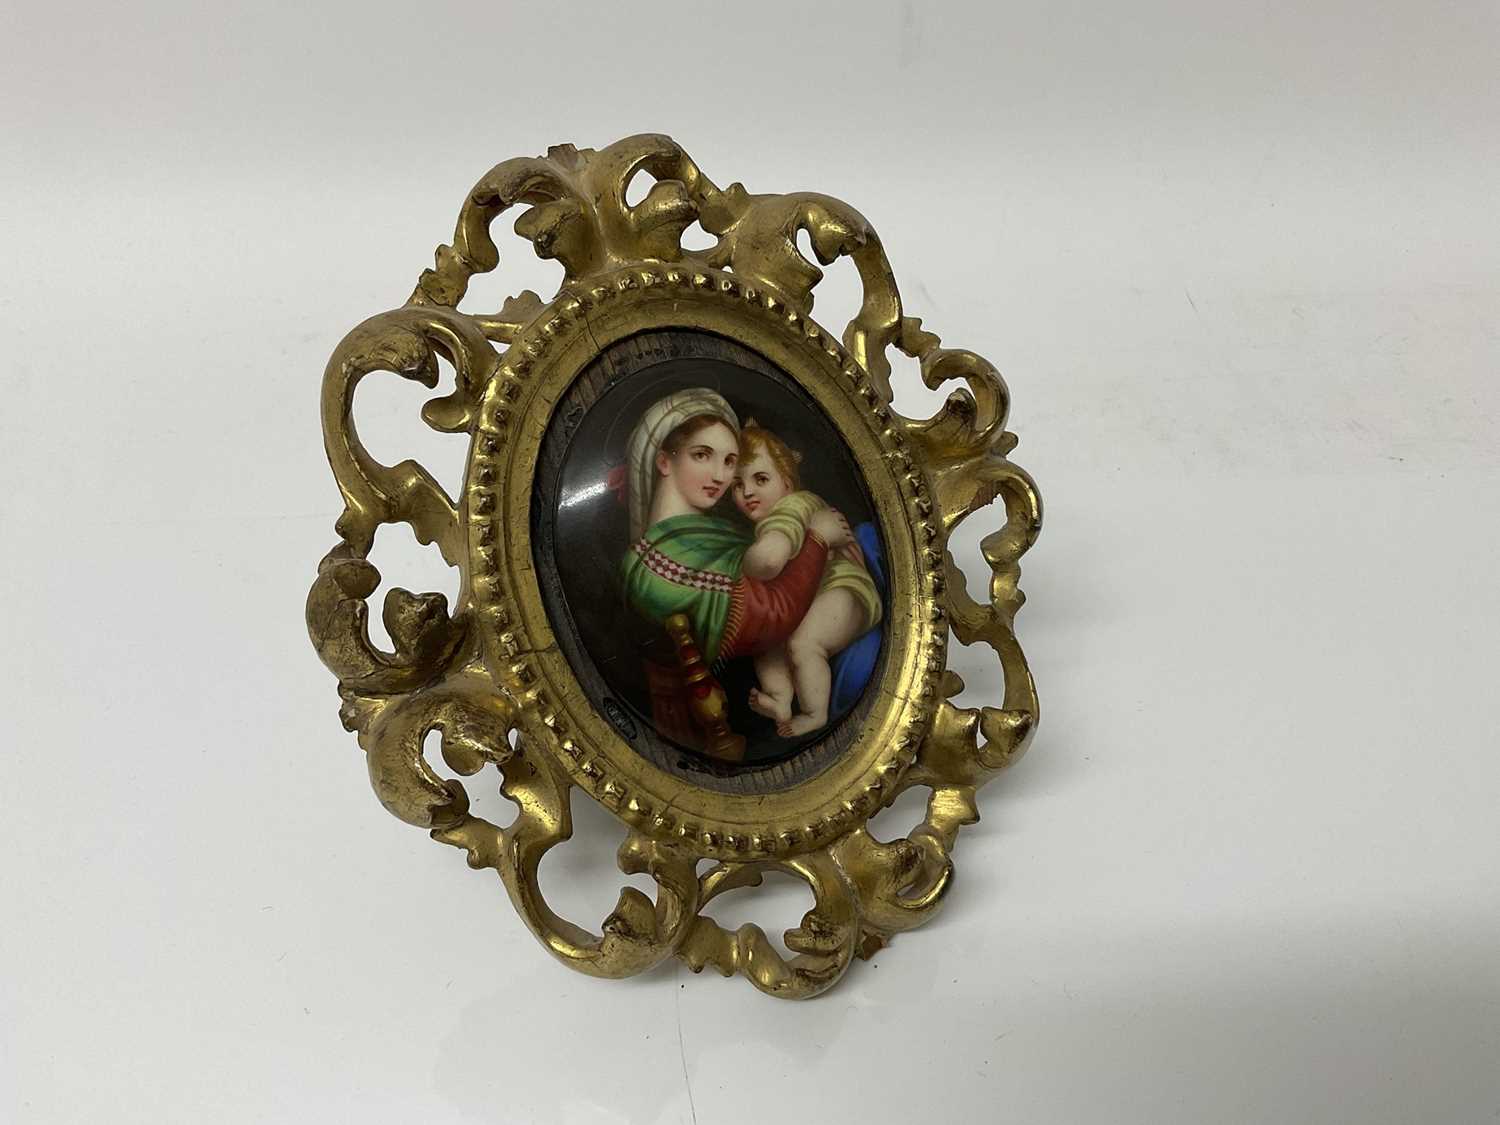 Lot 91 - 19th century Italian porcelain plaque depicting the Madonna & Child in giltwood frame